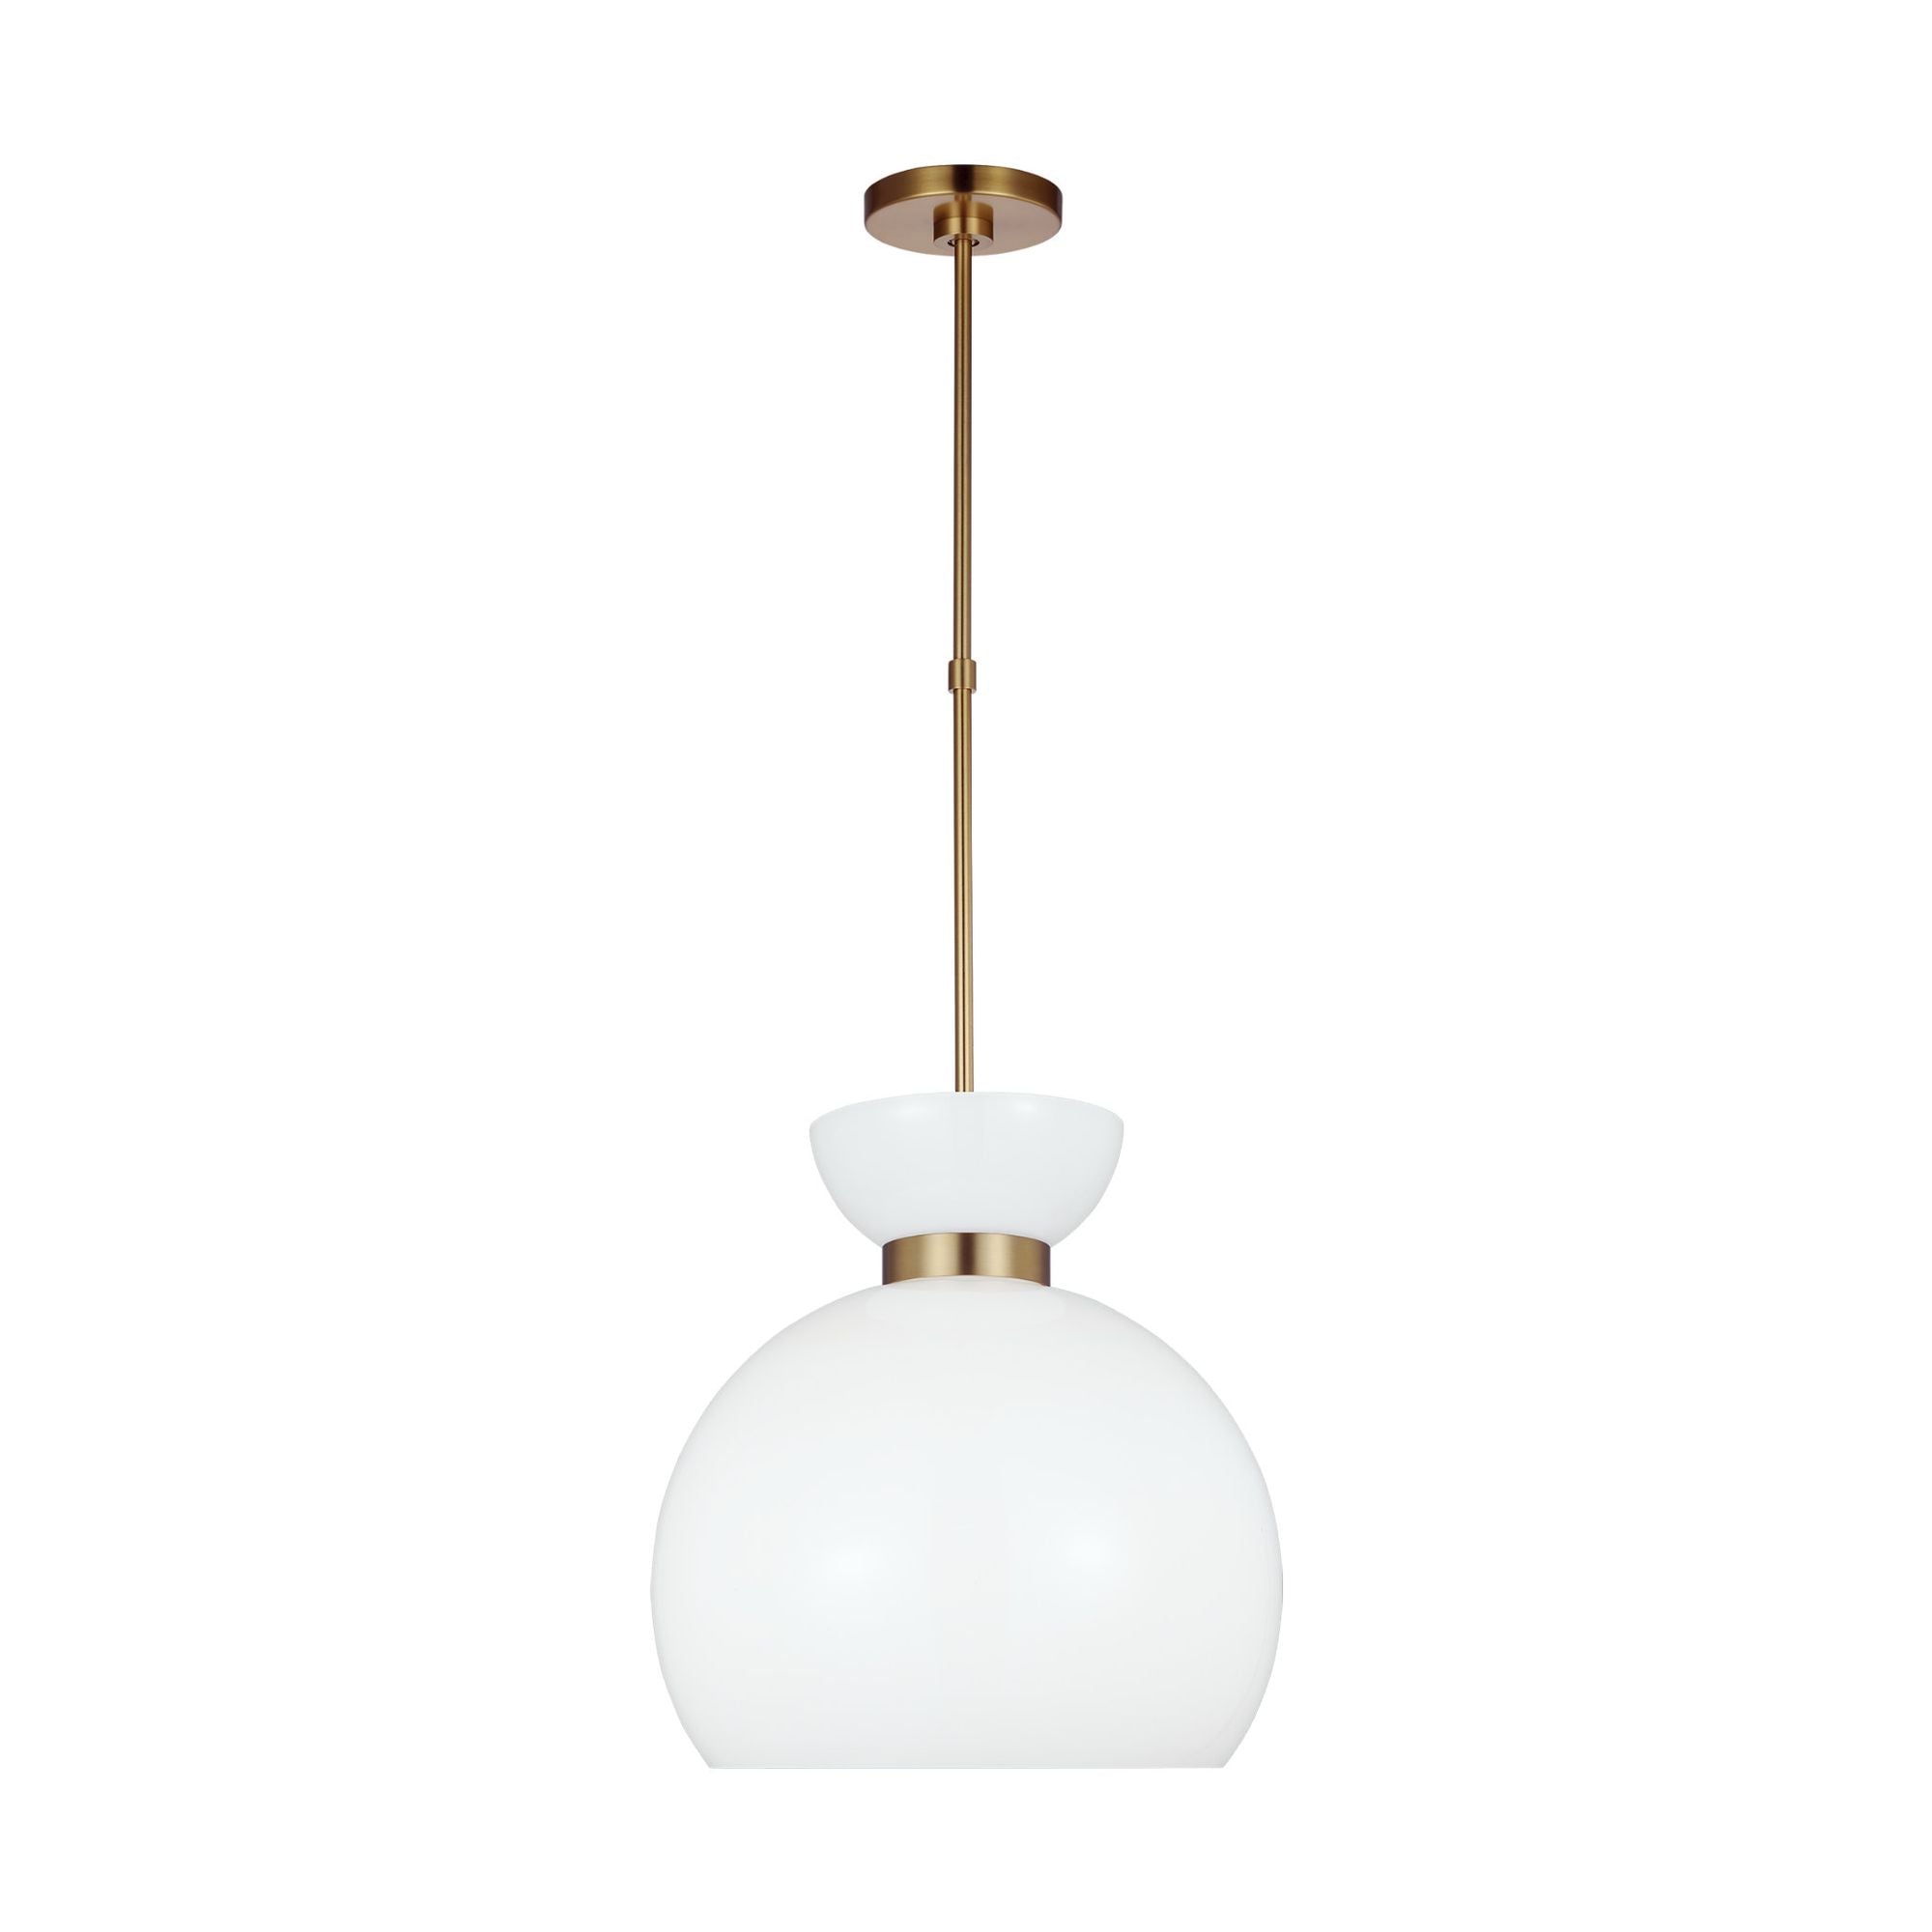 kate spade new york Londyn Round Pendant in Burnished Brass with Milk White Glass